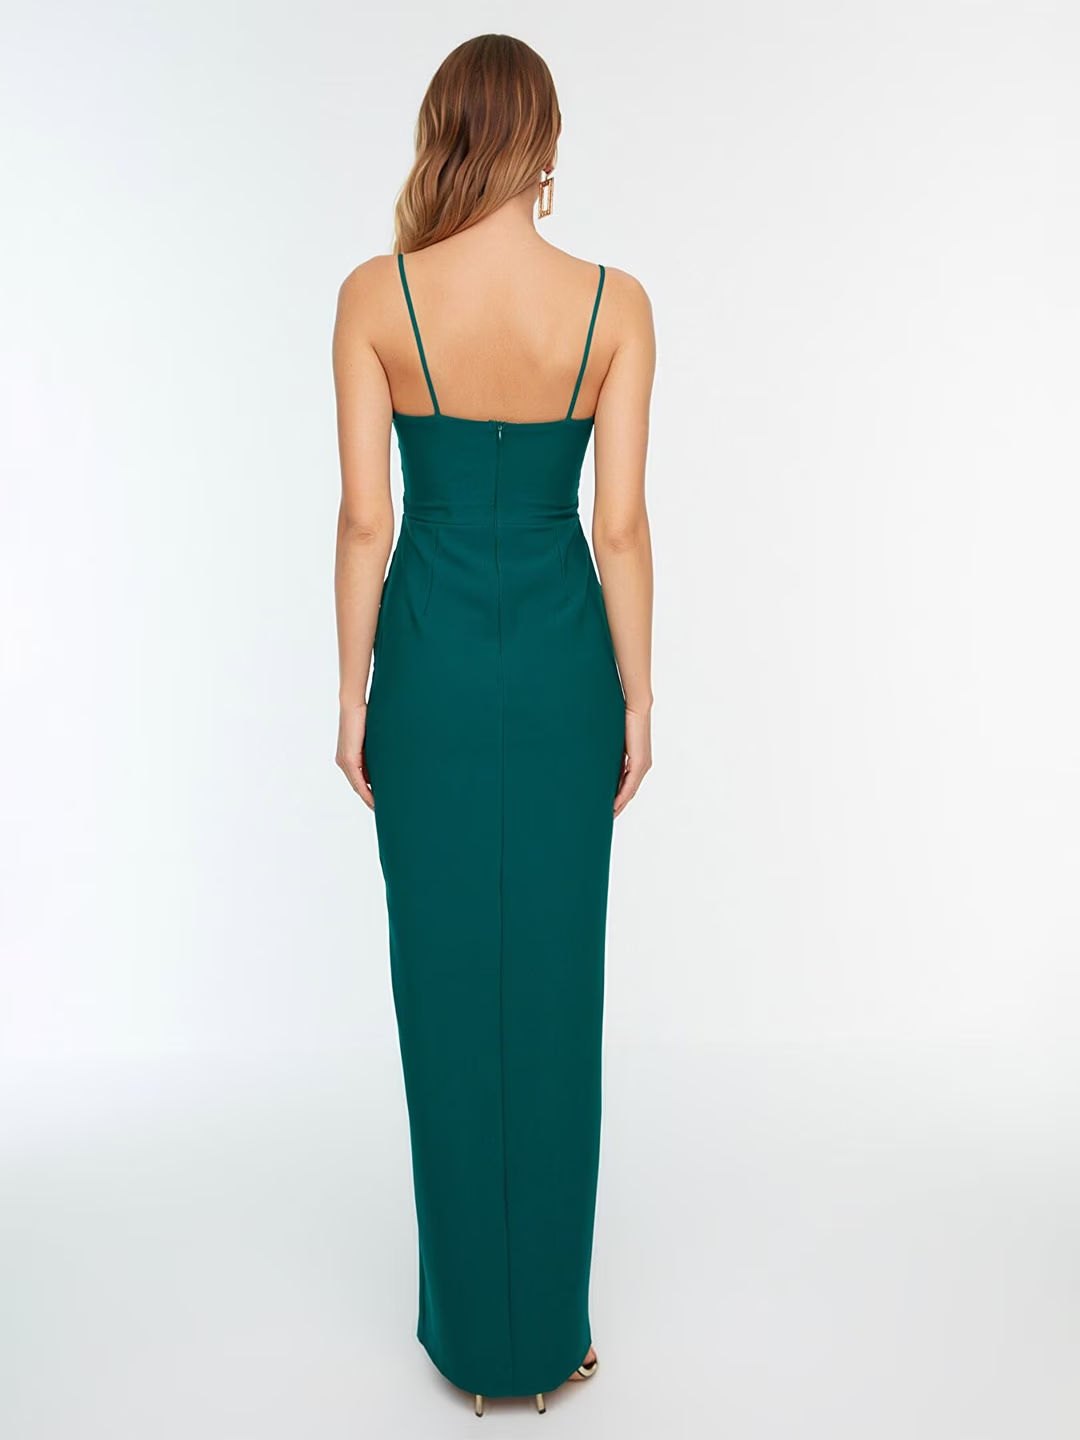 Strapless Maxi Party Dress